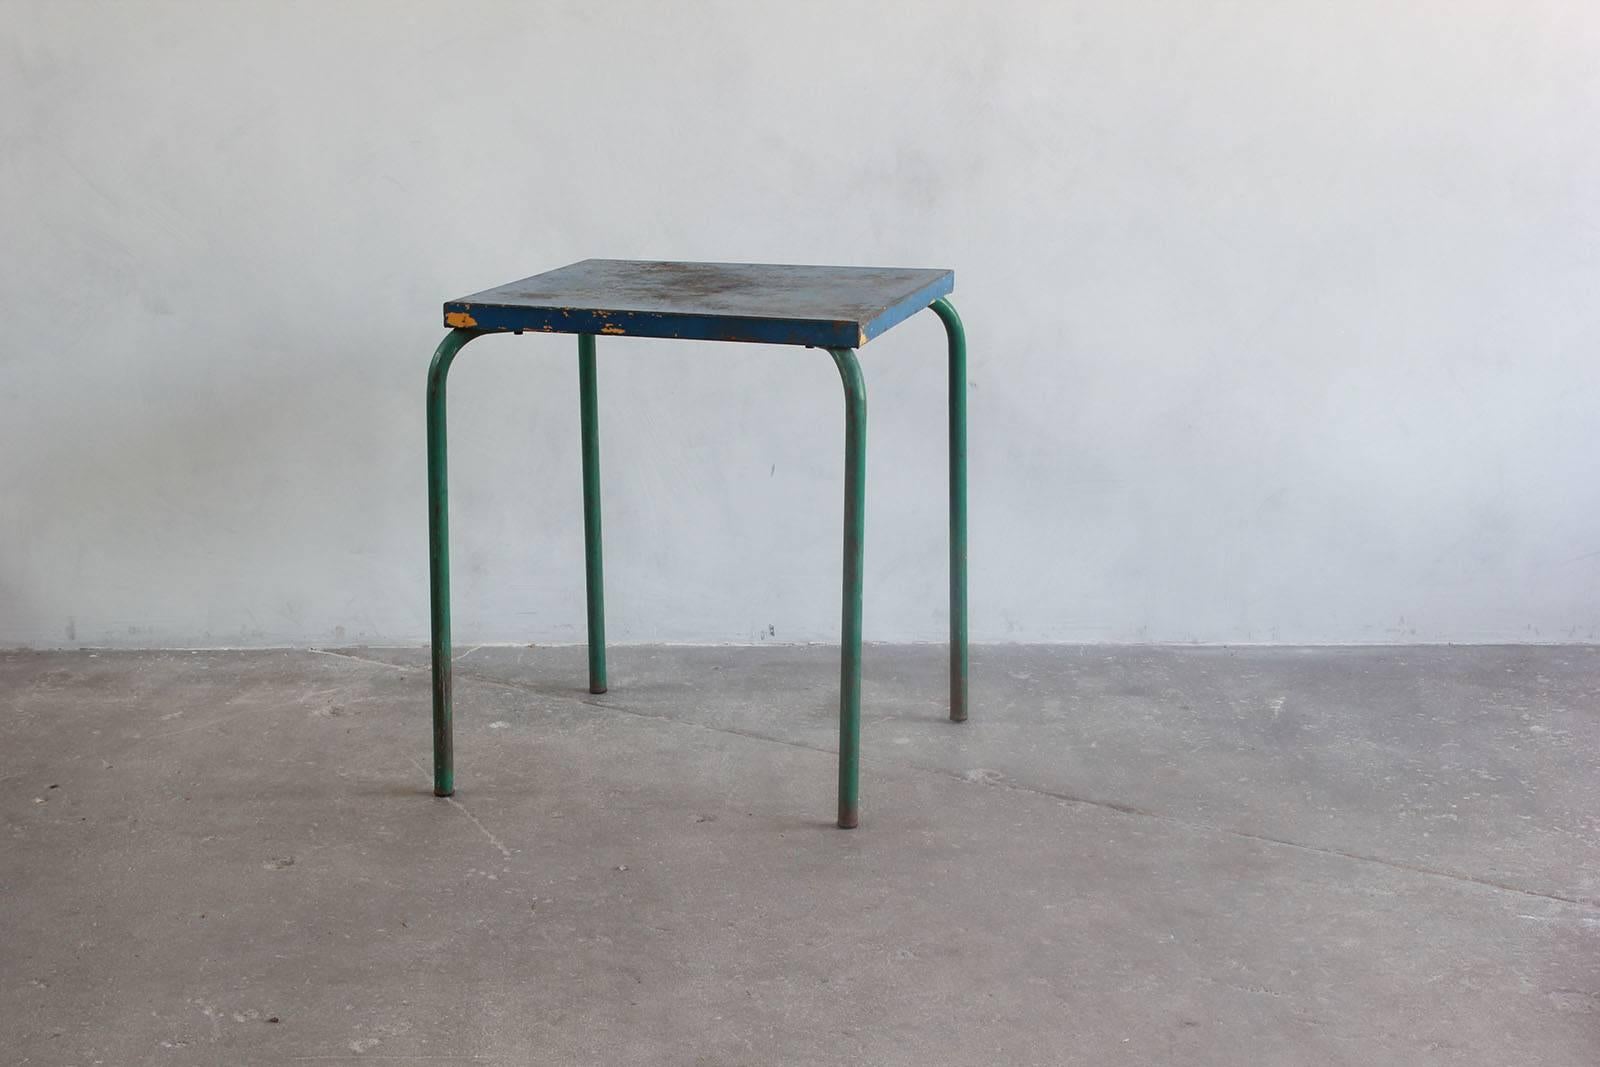 Tall metal blue and green painted table.